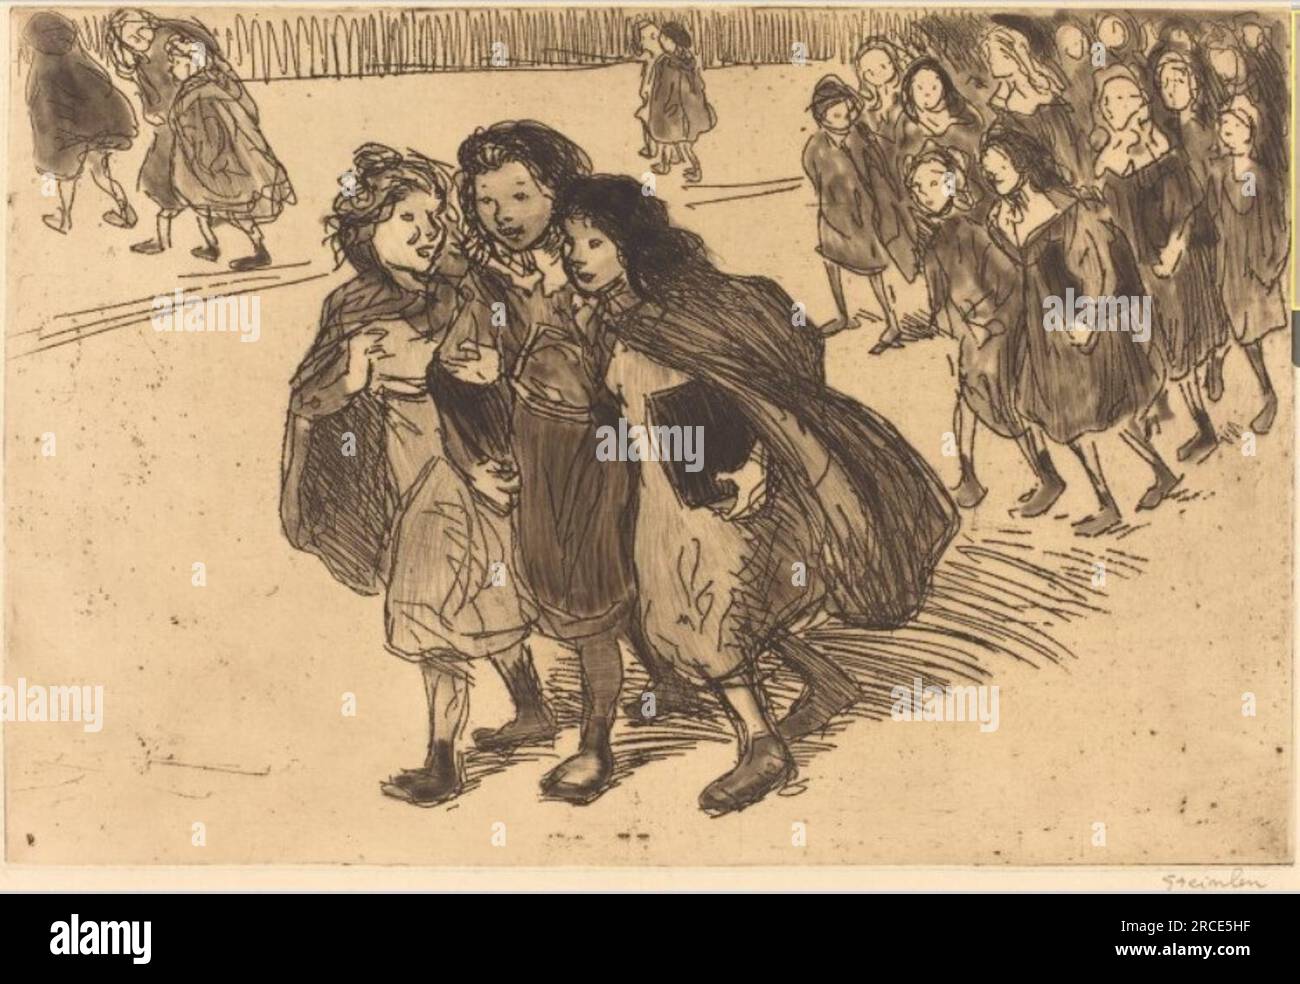 Gamines Sortant de L'Ecole 1911 by Theophile Steinlen Stock Photo